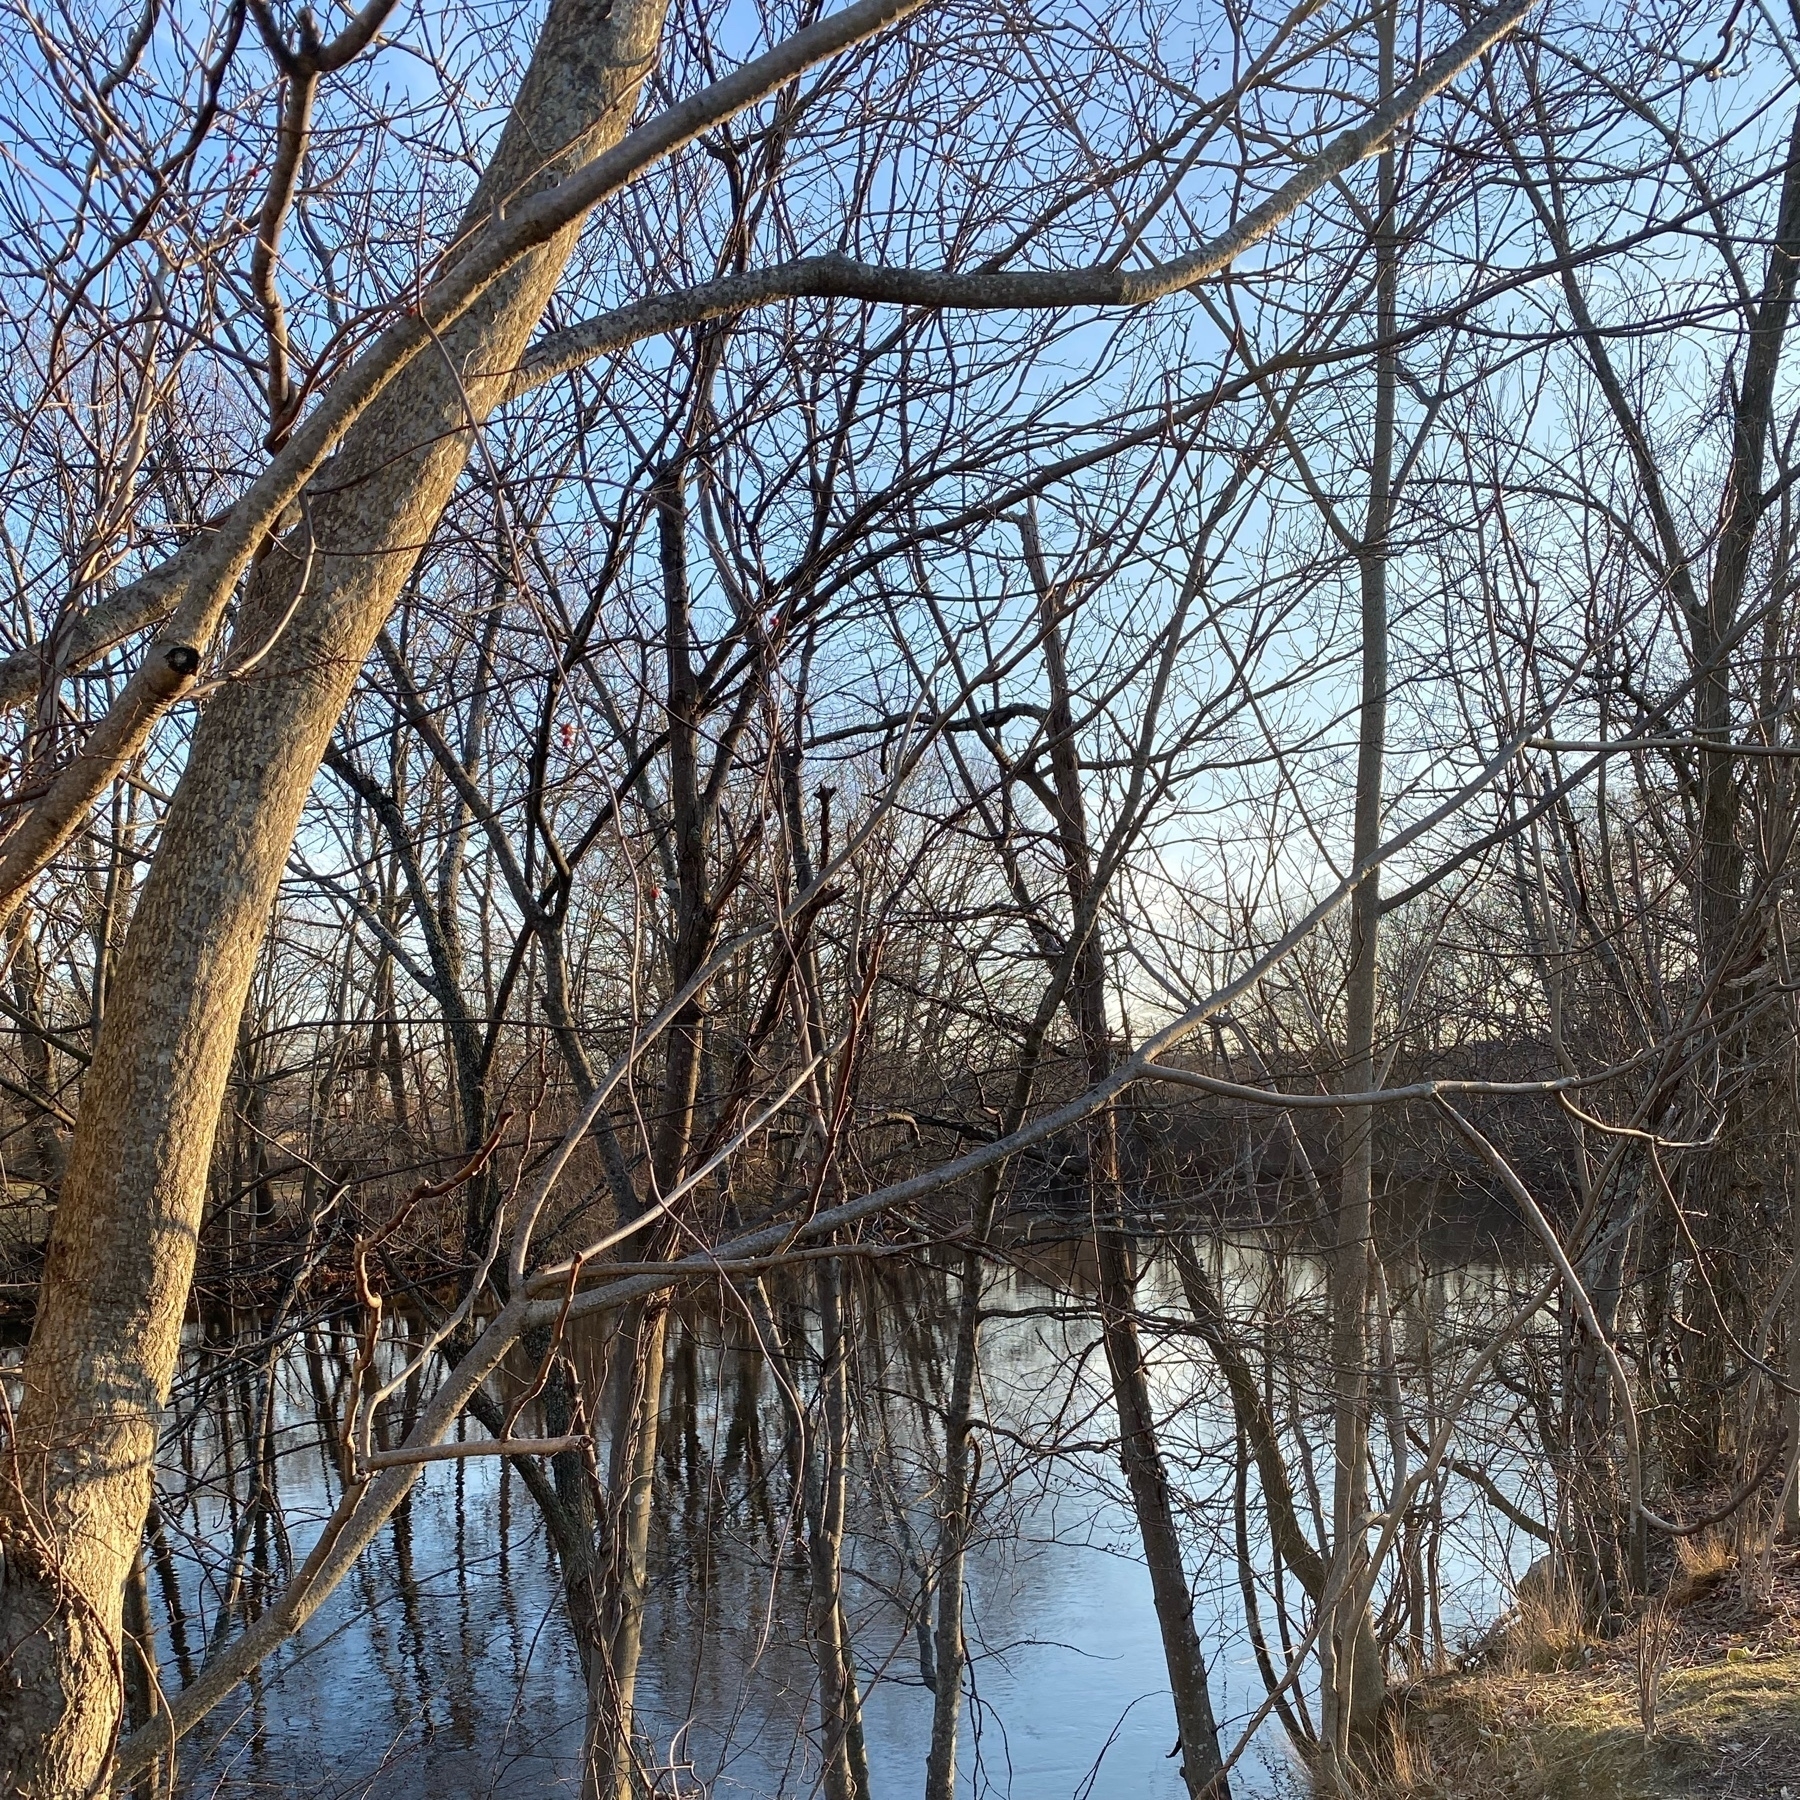 Bare trees along the banks of a quiet river.